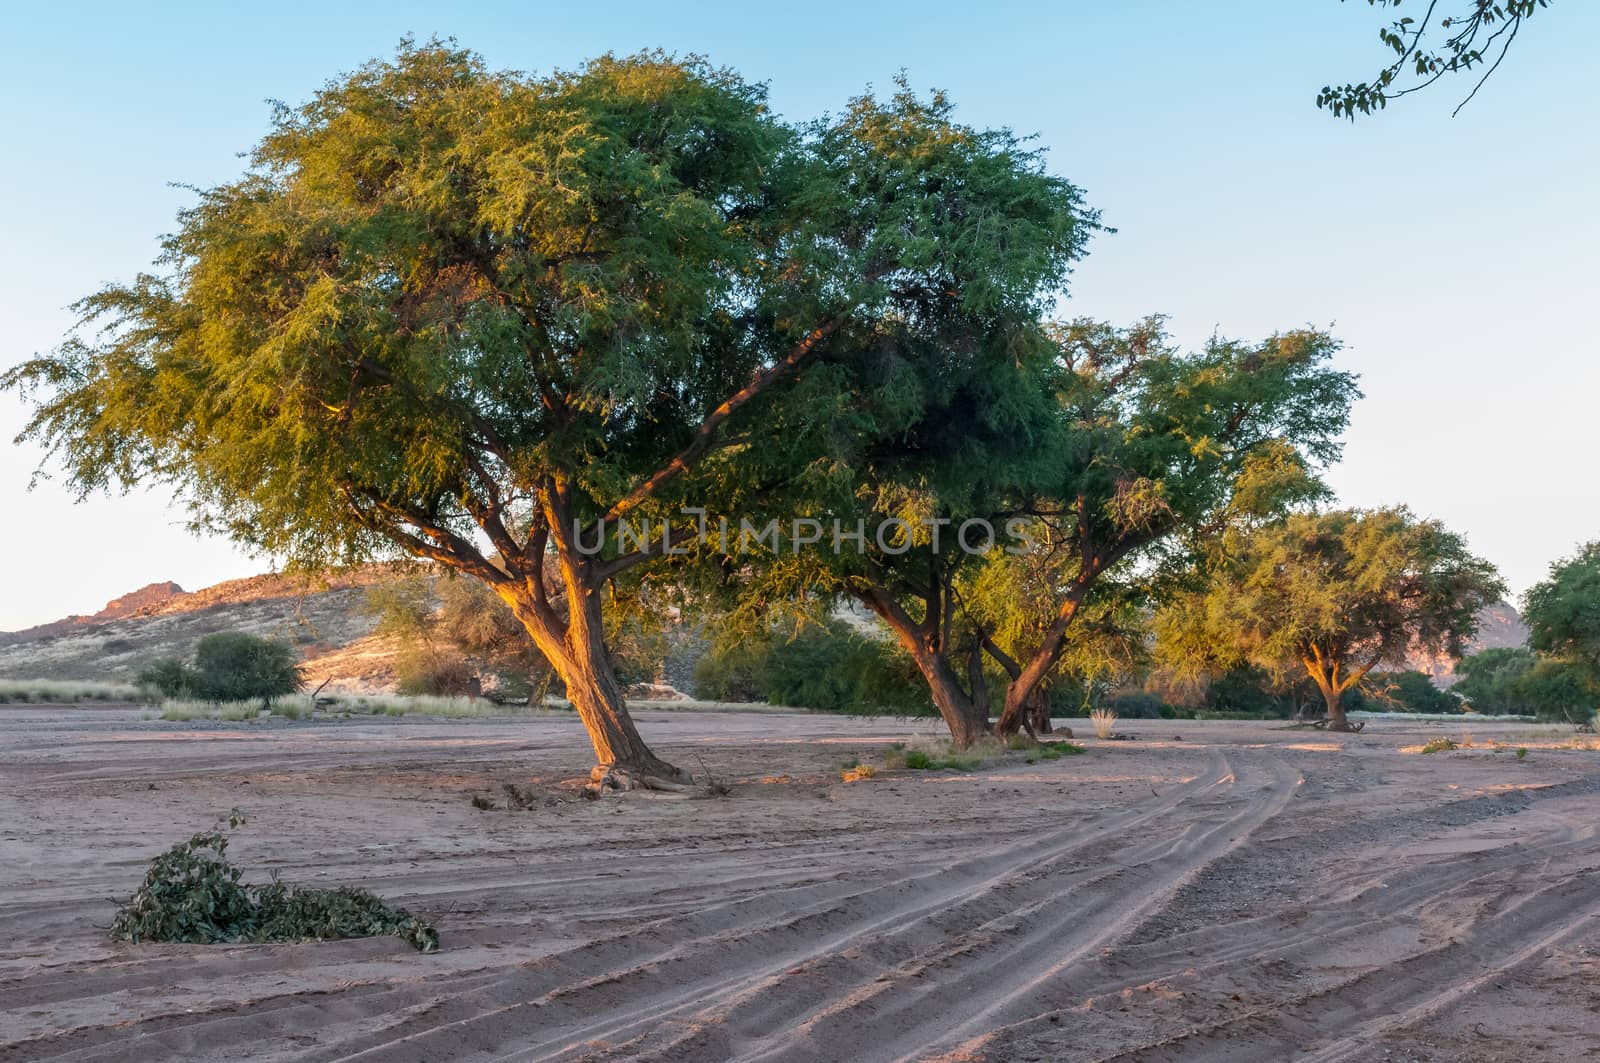 Camelthorn trees and vehicle tracks in the Aba Huab river by dpreezg